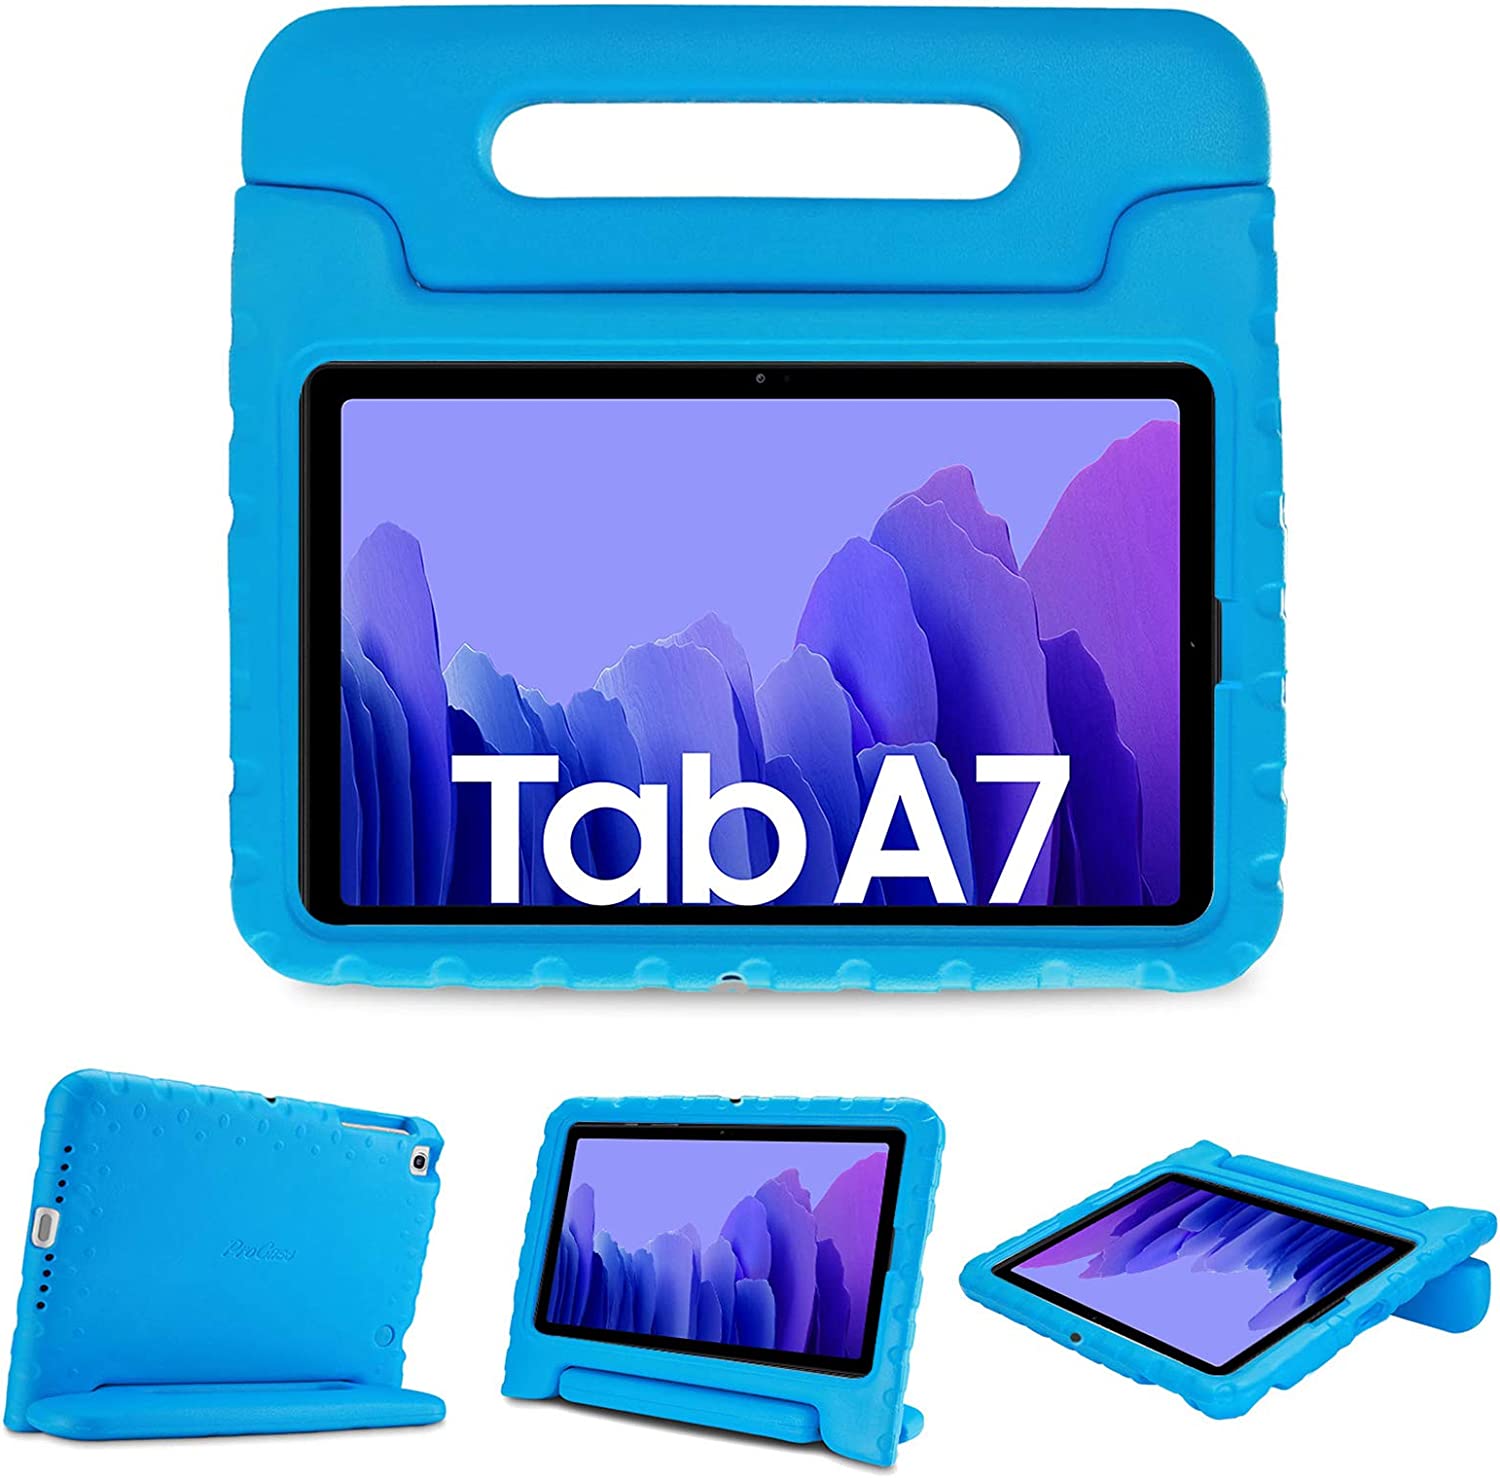 A product image of the Procase kids case for the Galaxy Tab A7 10.4.